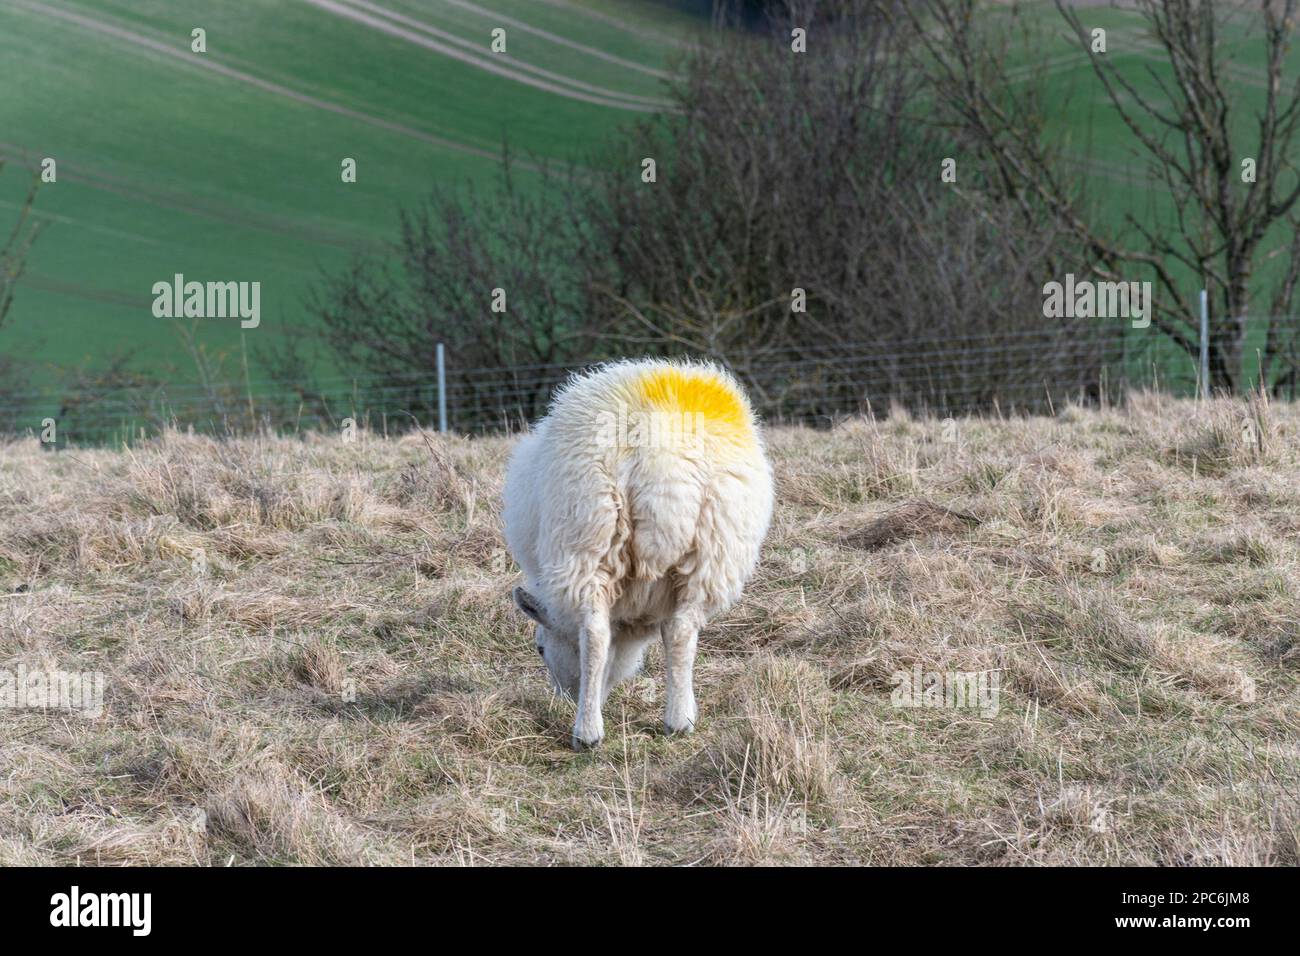 Sheep marked with yellow paint on rump Stock Photo